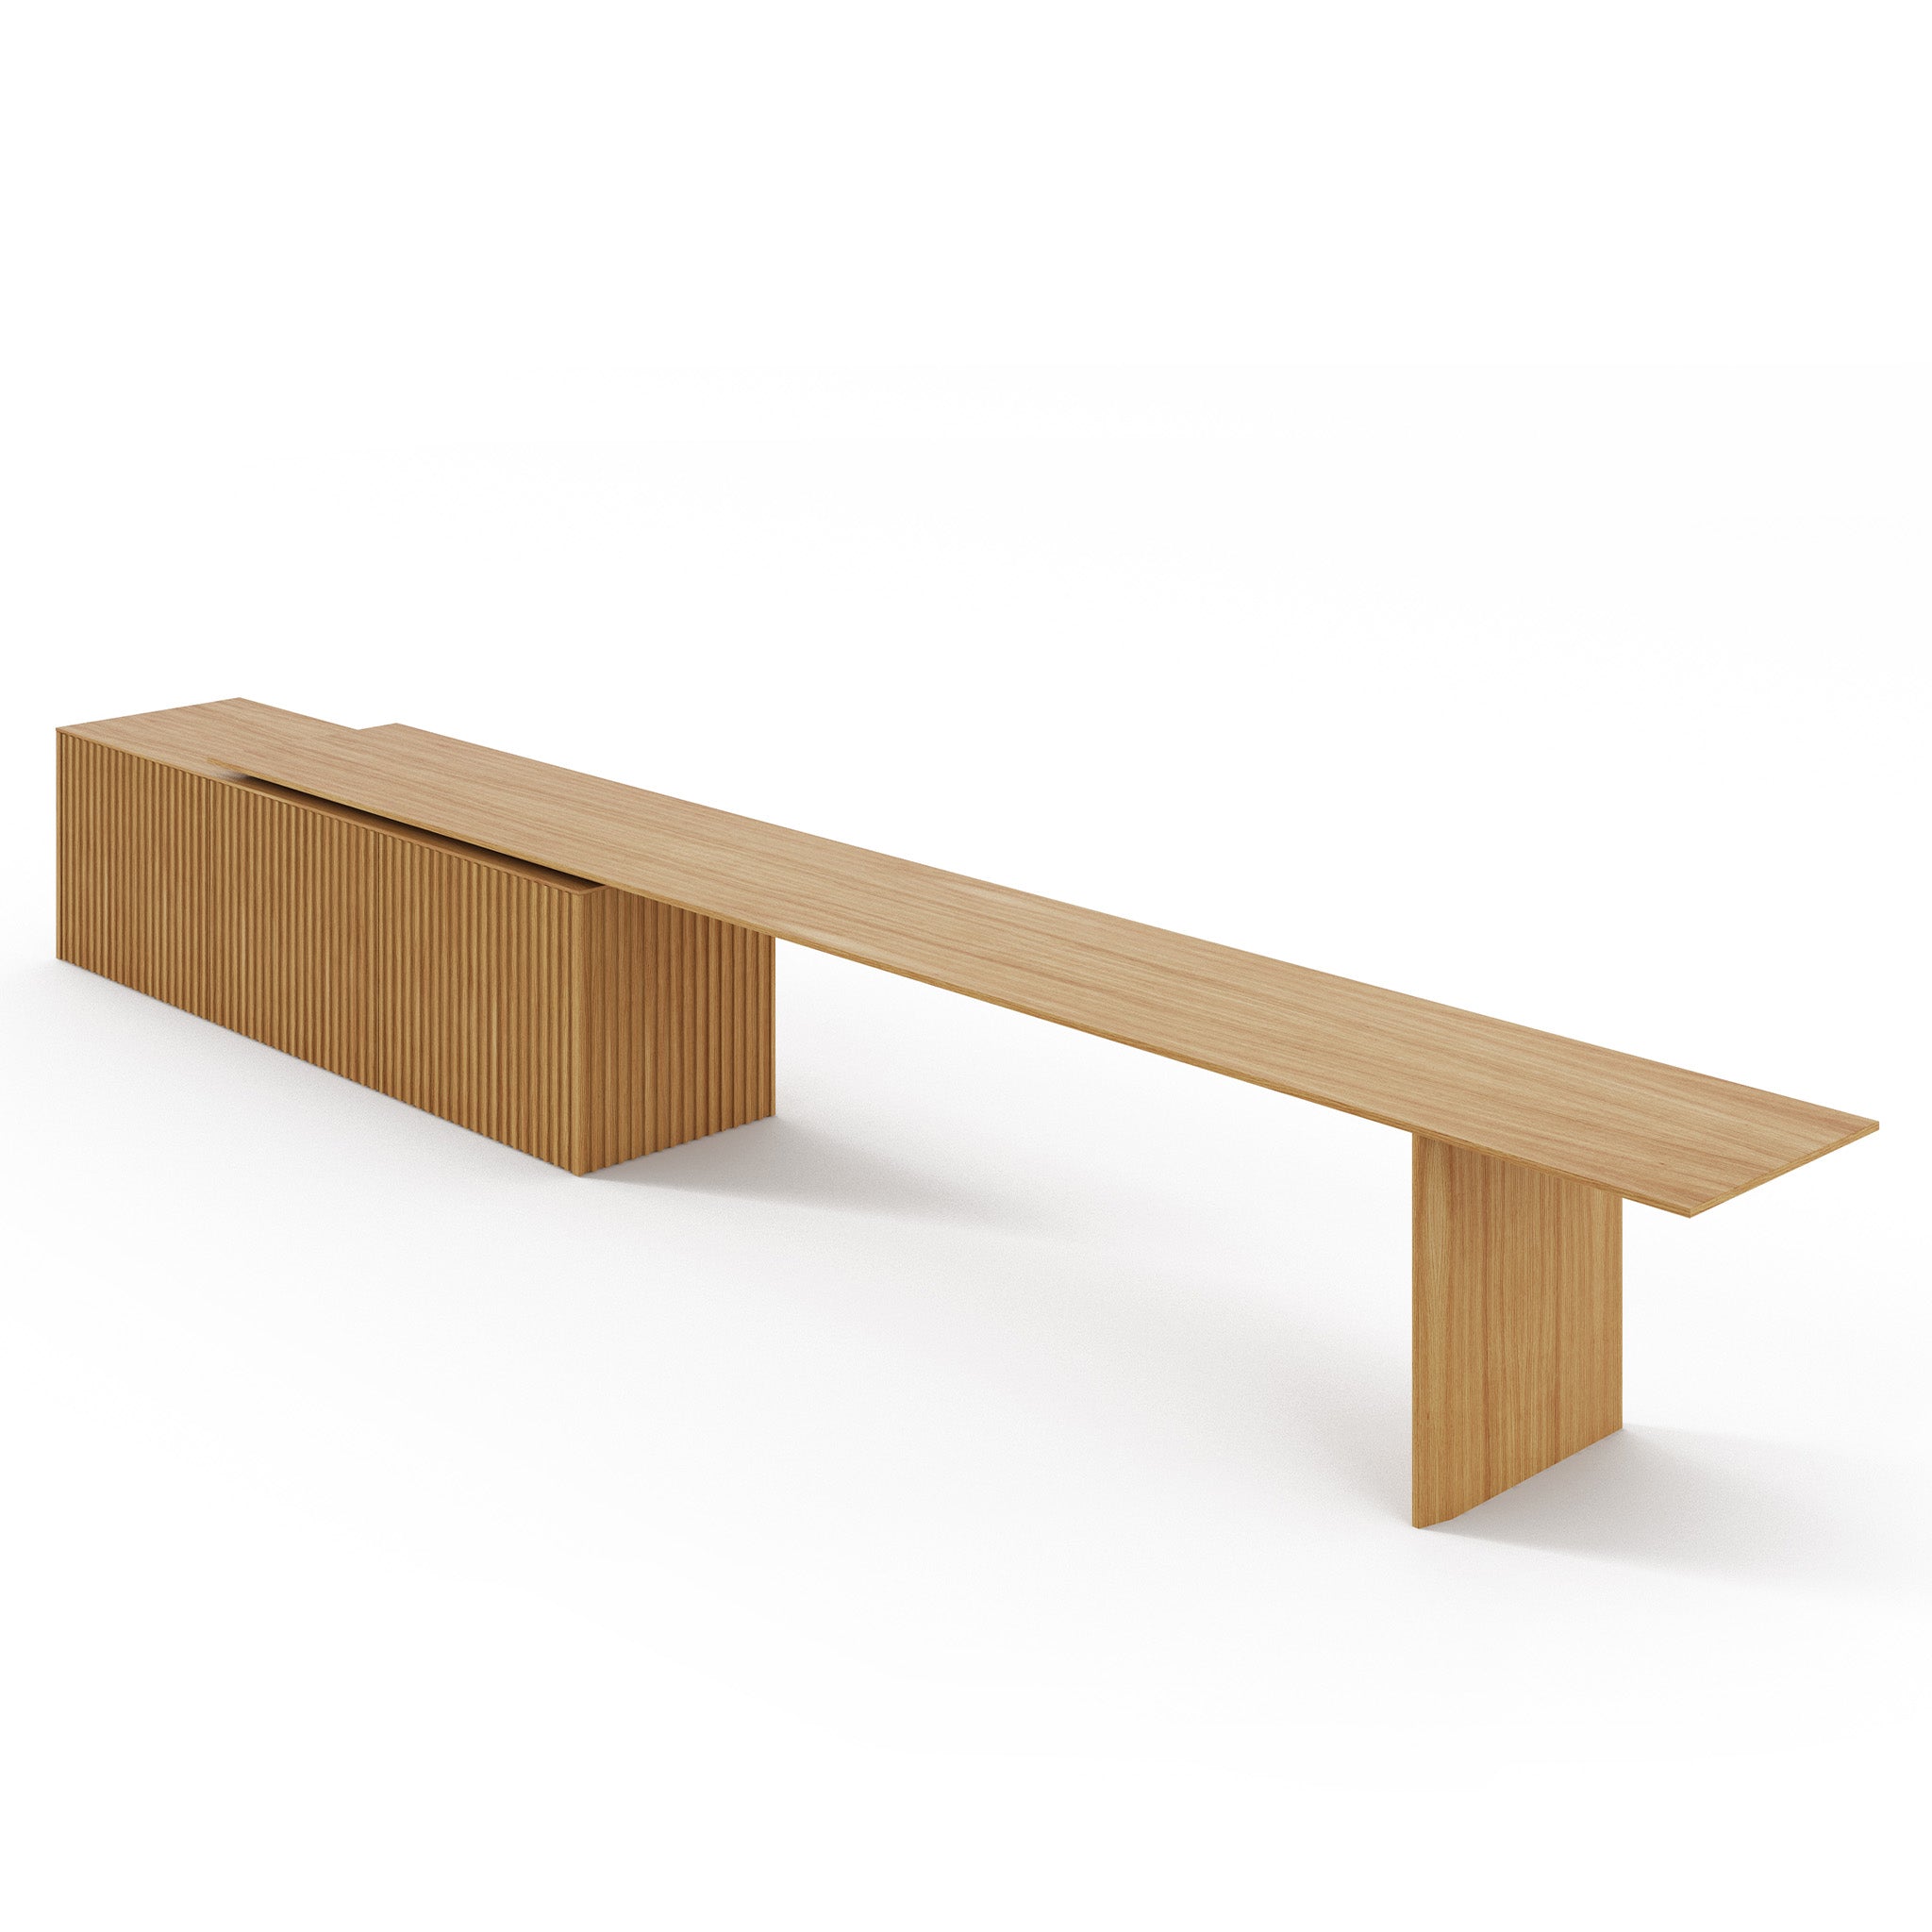 Velasca Extending Sideboard by Ludovica & Roberto Palomba for Punt